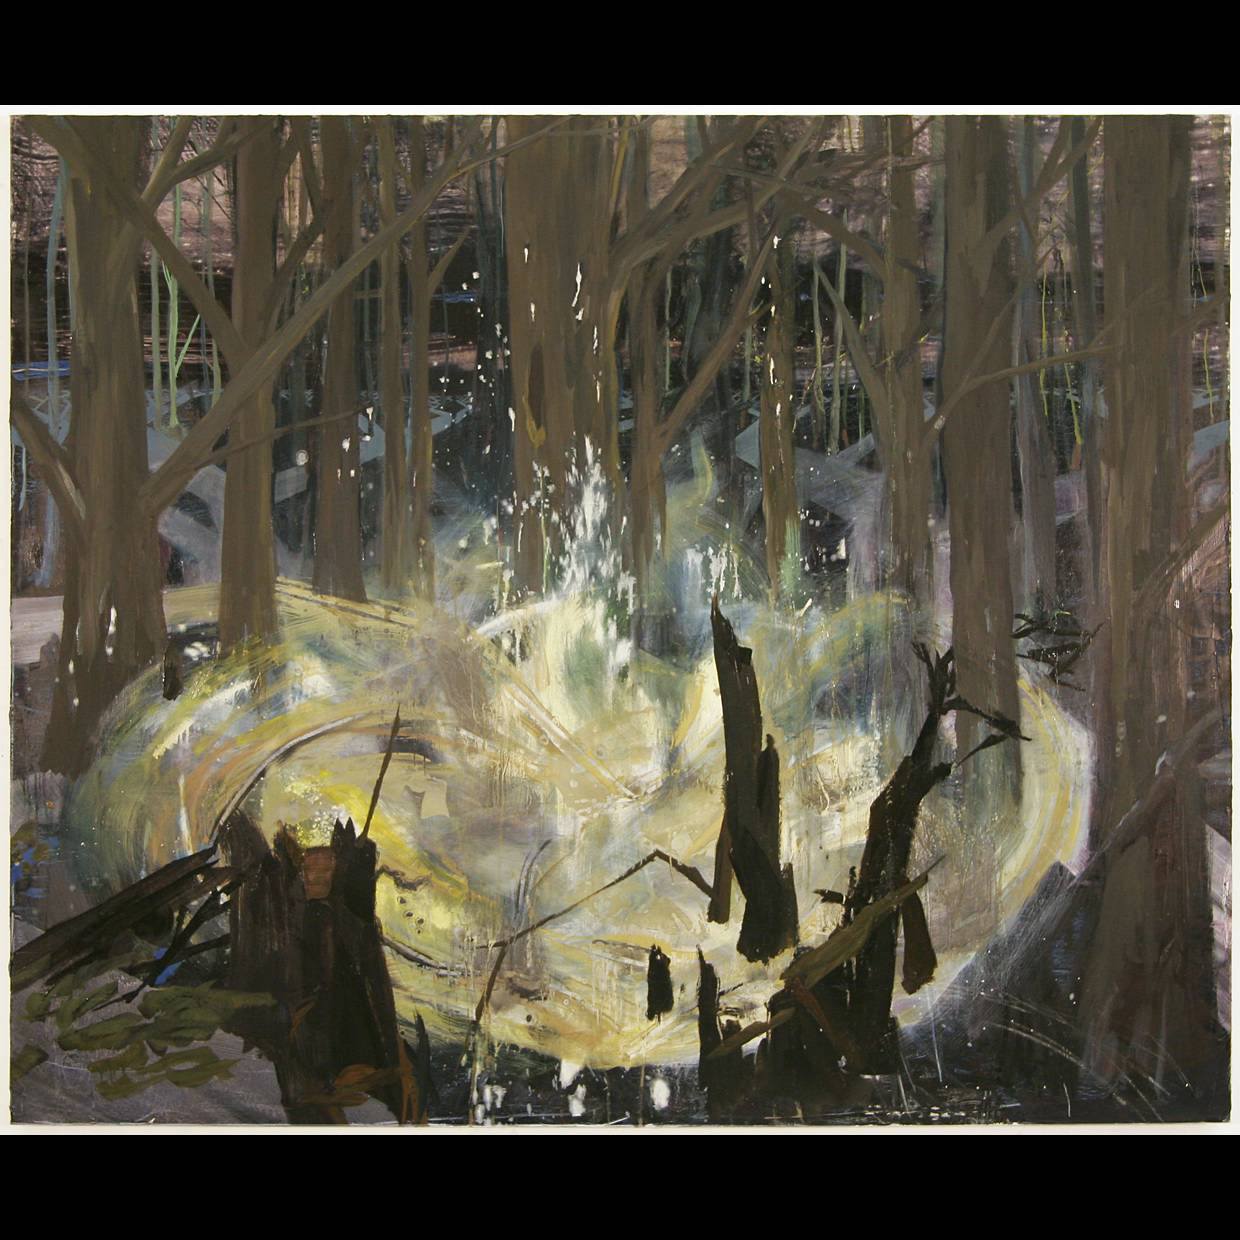 An abstract painting of trees with a yellow and white bright form at the center